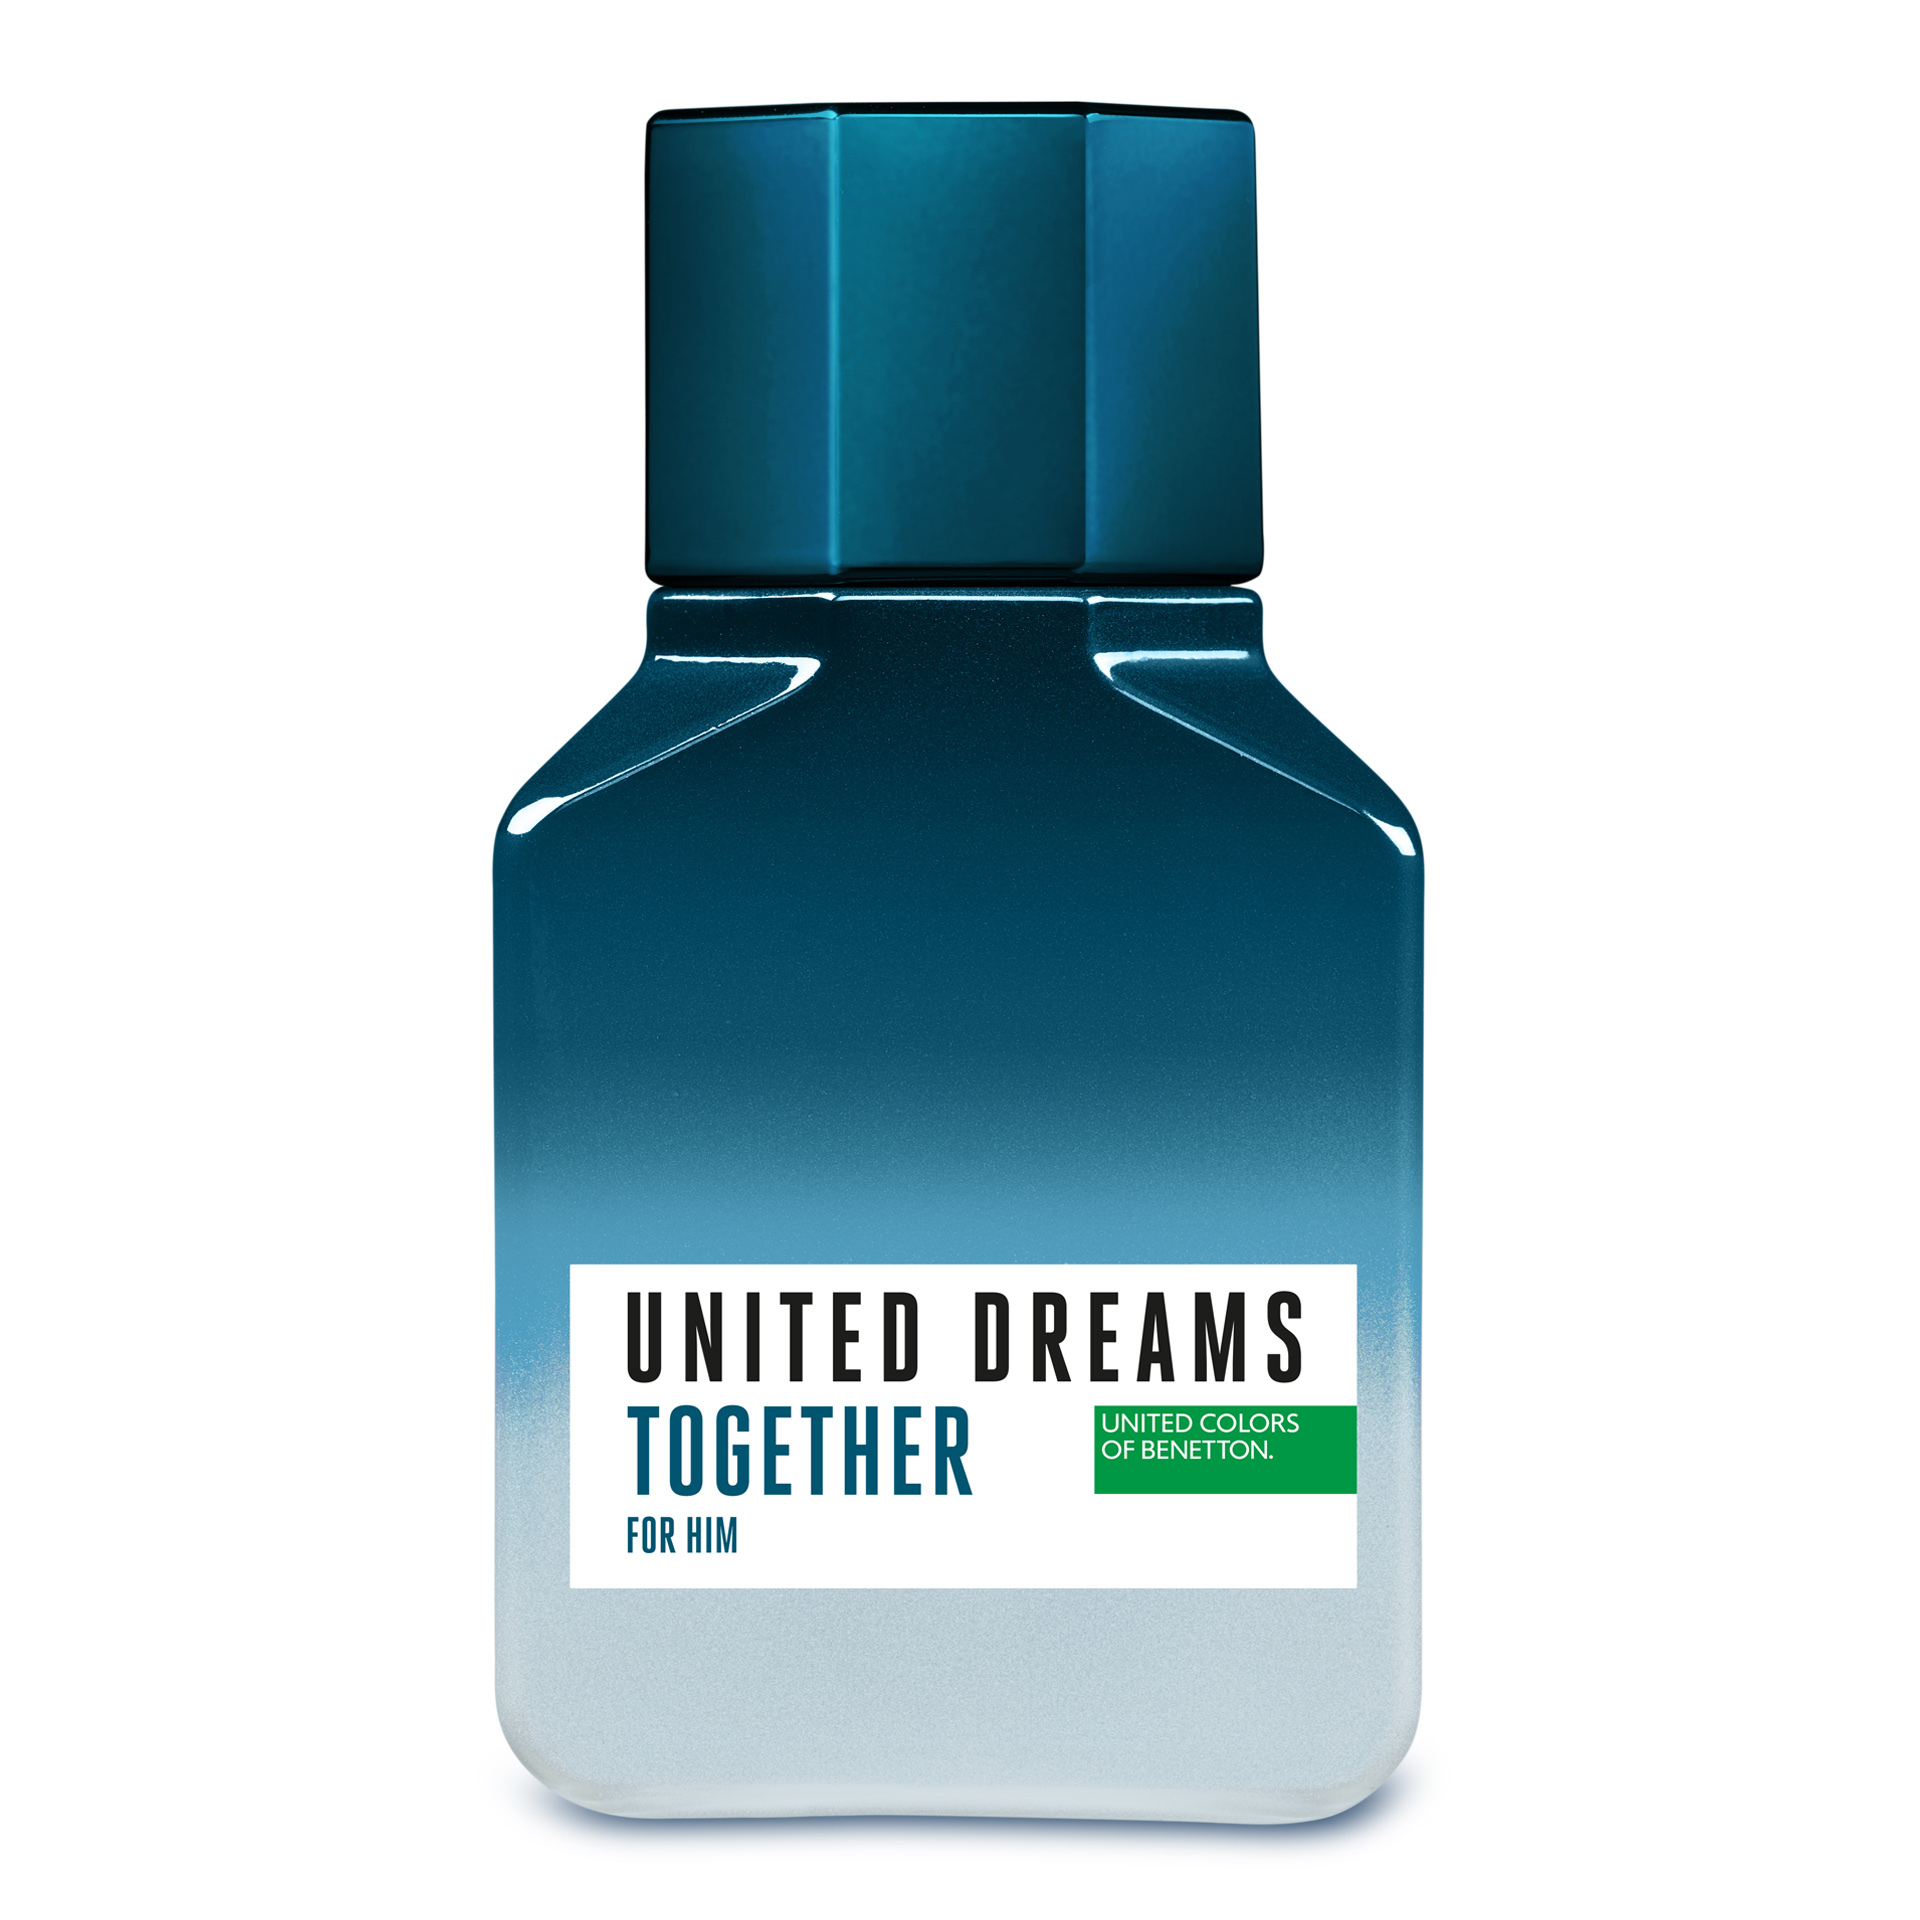 Benetton туалетная вода united dreams. Туалетная вода United Colors of Benetton United Dreams together for him. Туалетная вода Бенеттон United Dreams. United Dreams United Colors of Benetton для мужчин. Benetton United Dreams мужские.